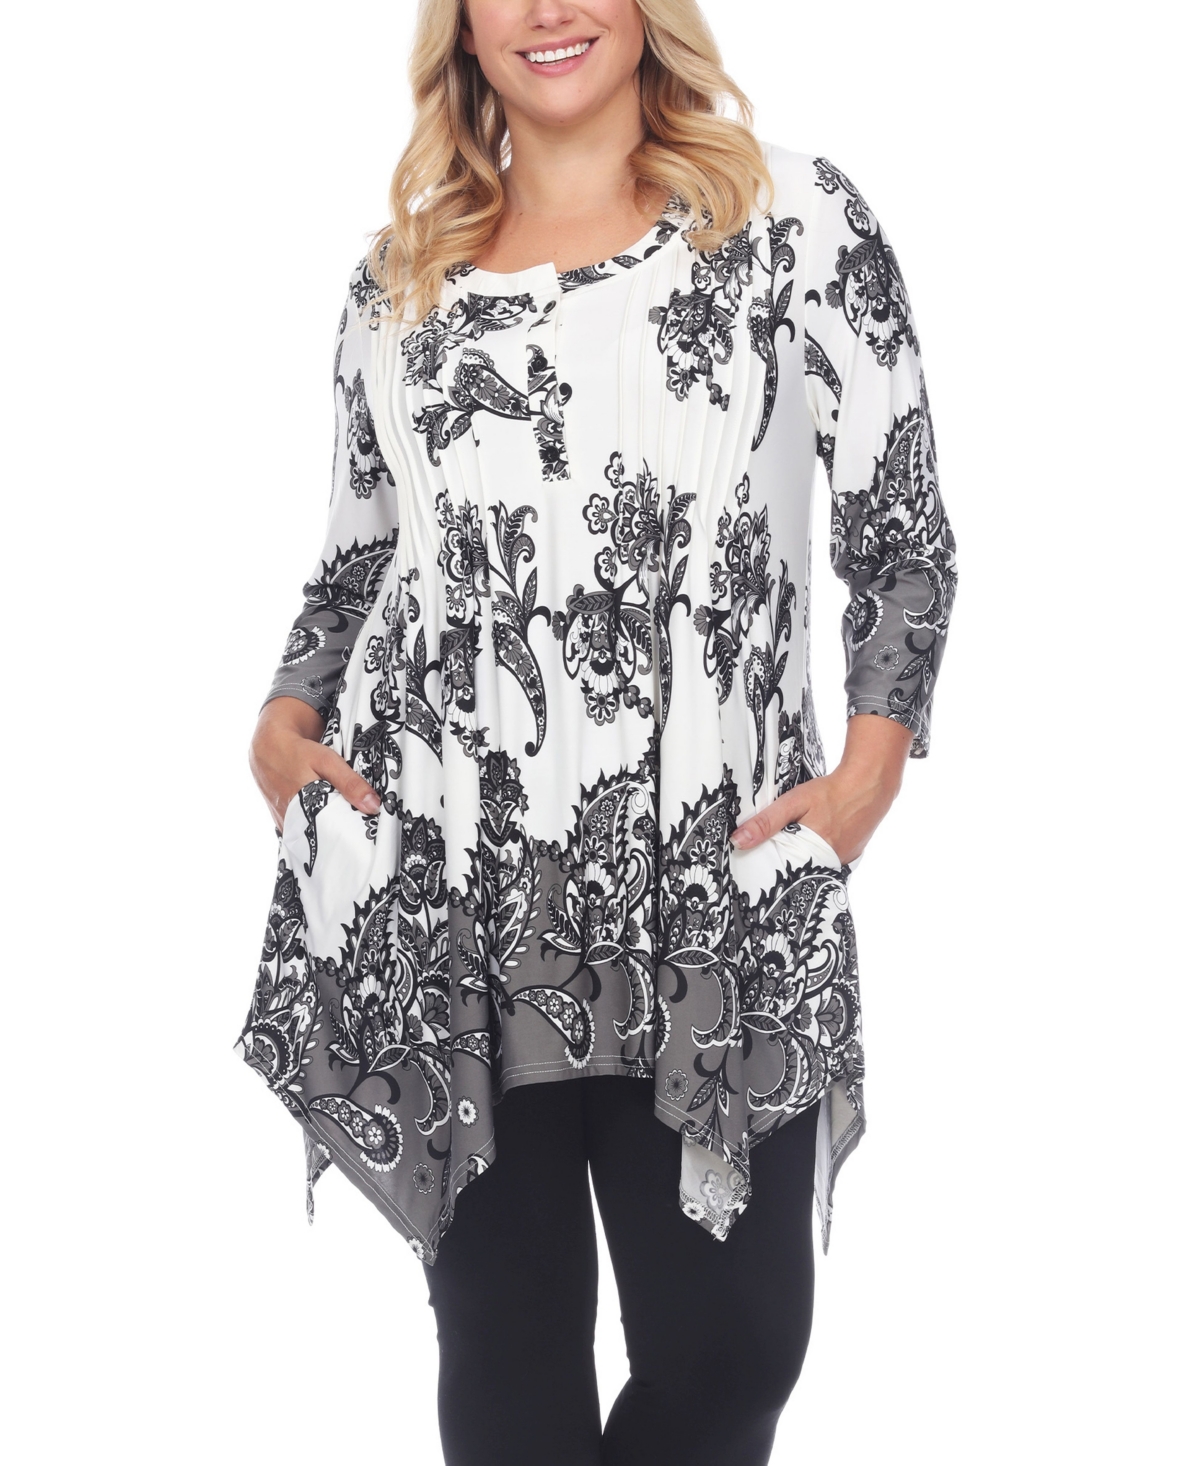 Women's Plus Size Floral Printed Tunic Top - White, Blue